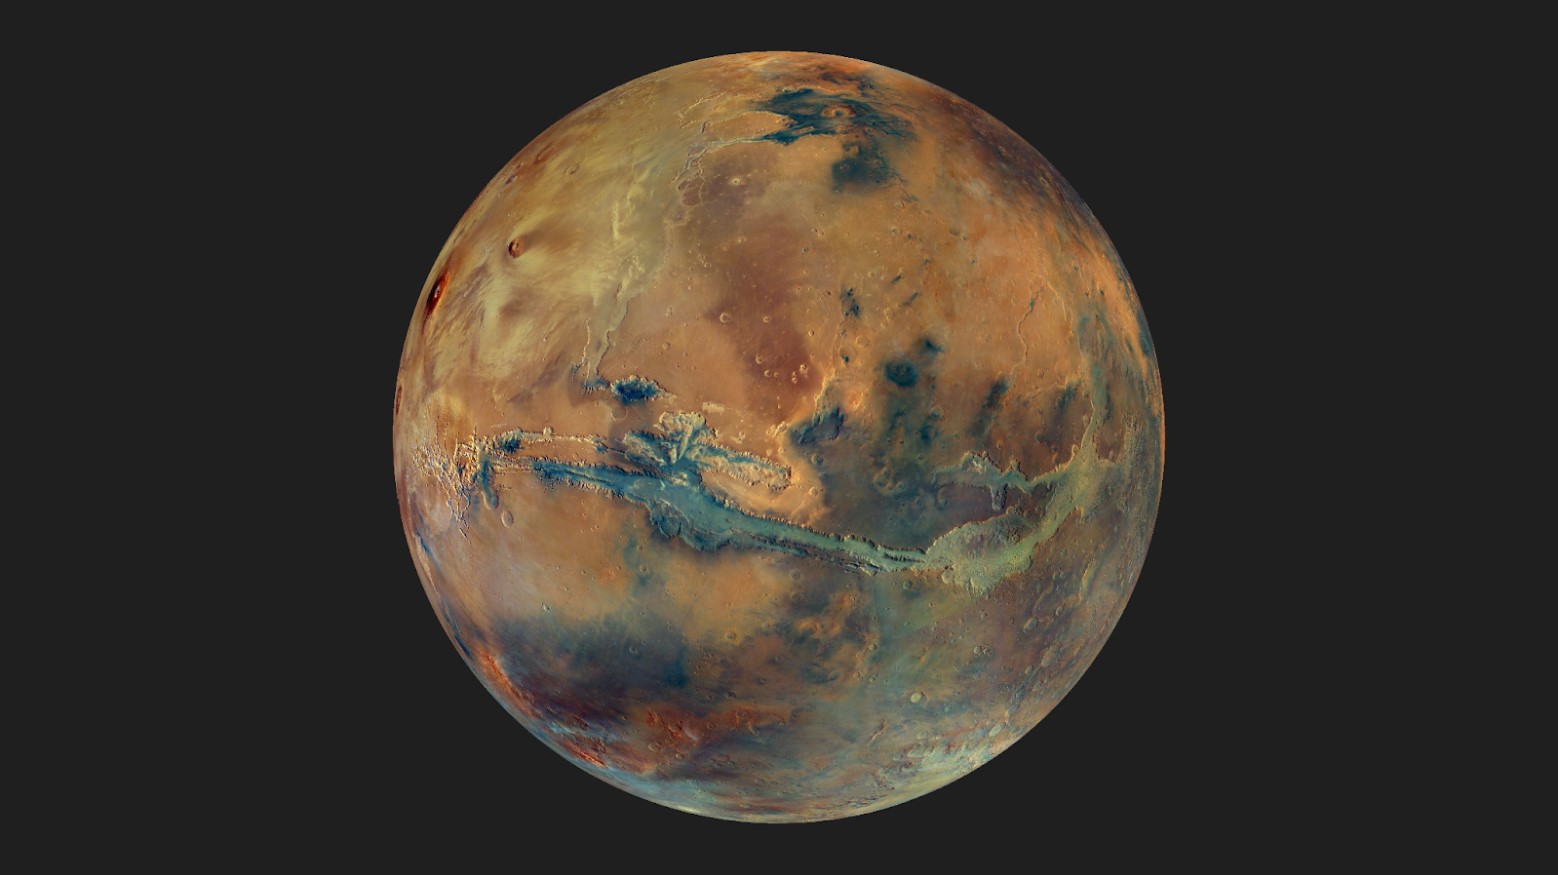 Mars against a black background